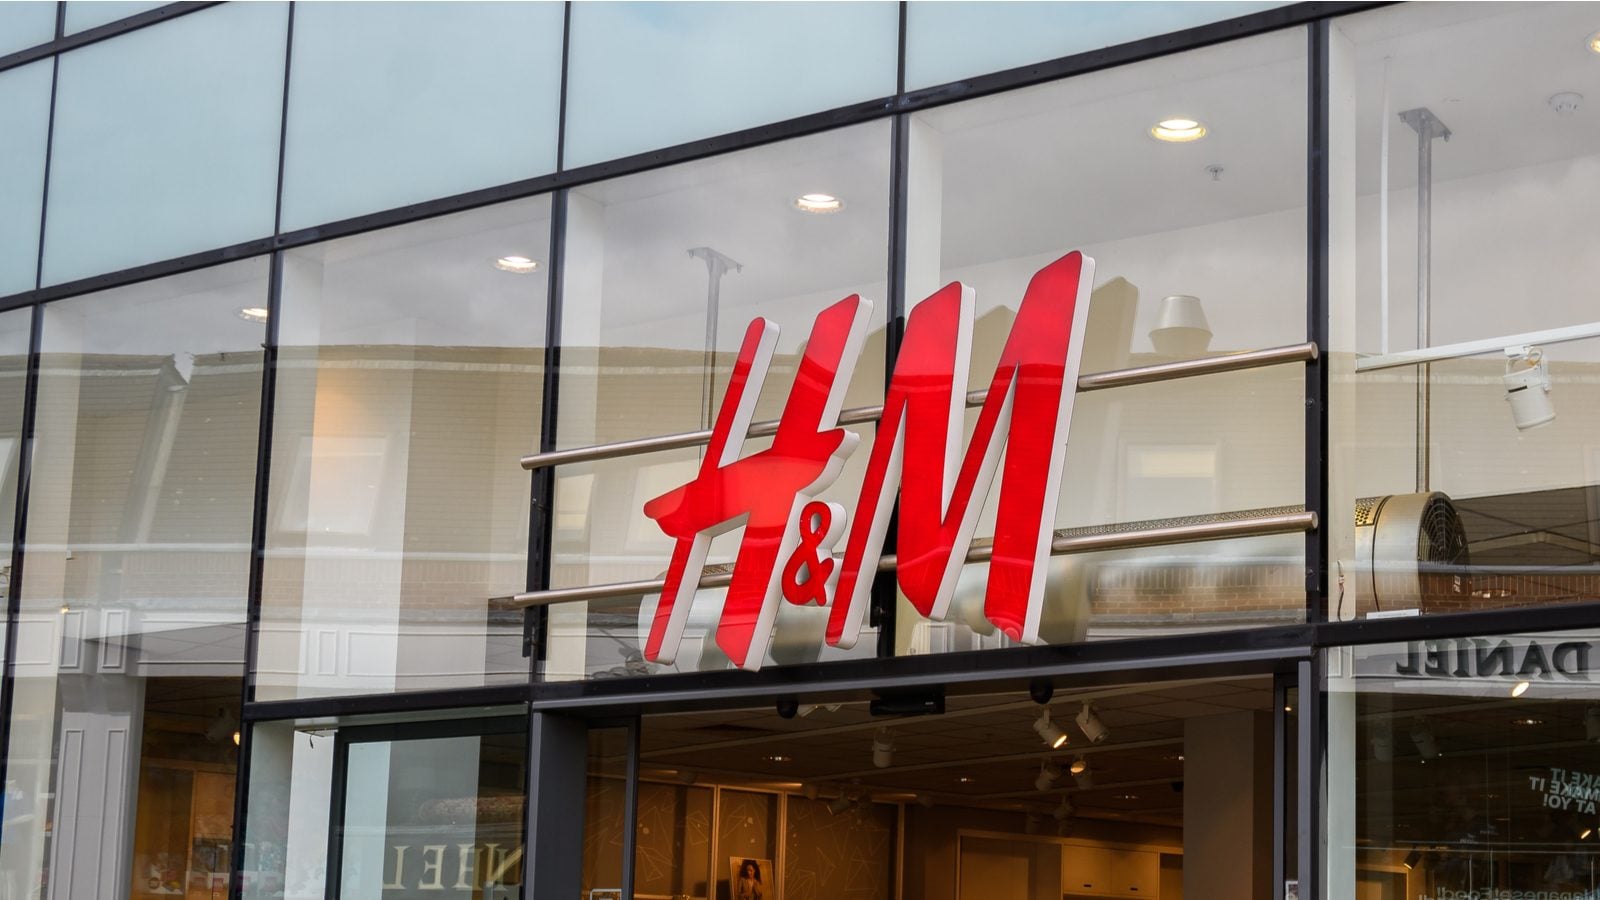 Chart: Number of Markets in which the H&M Group is Present